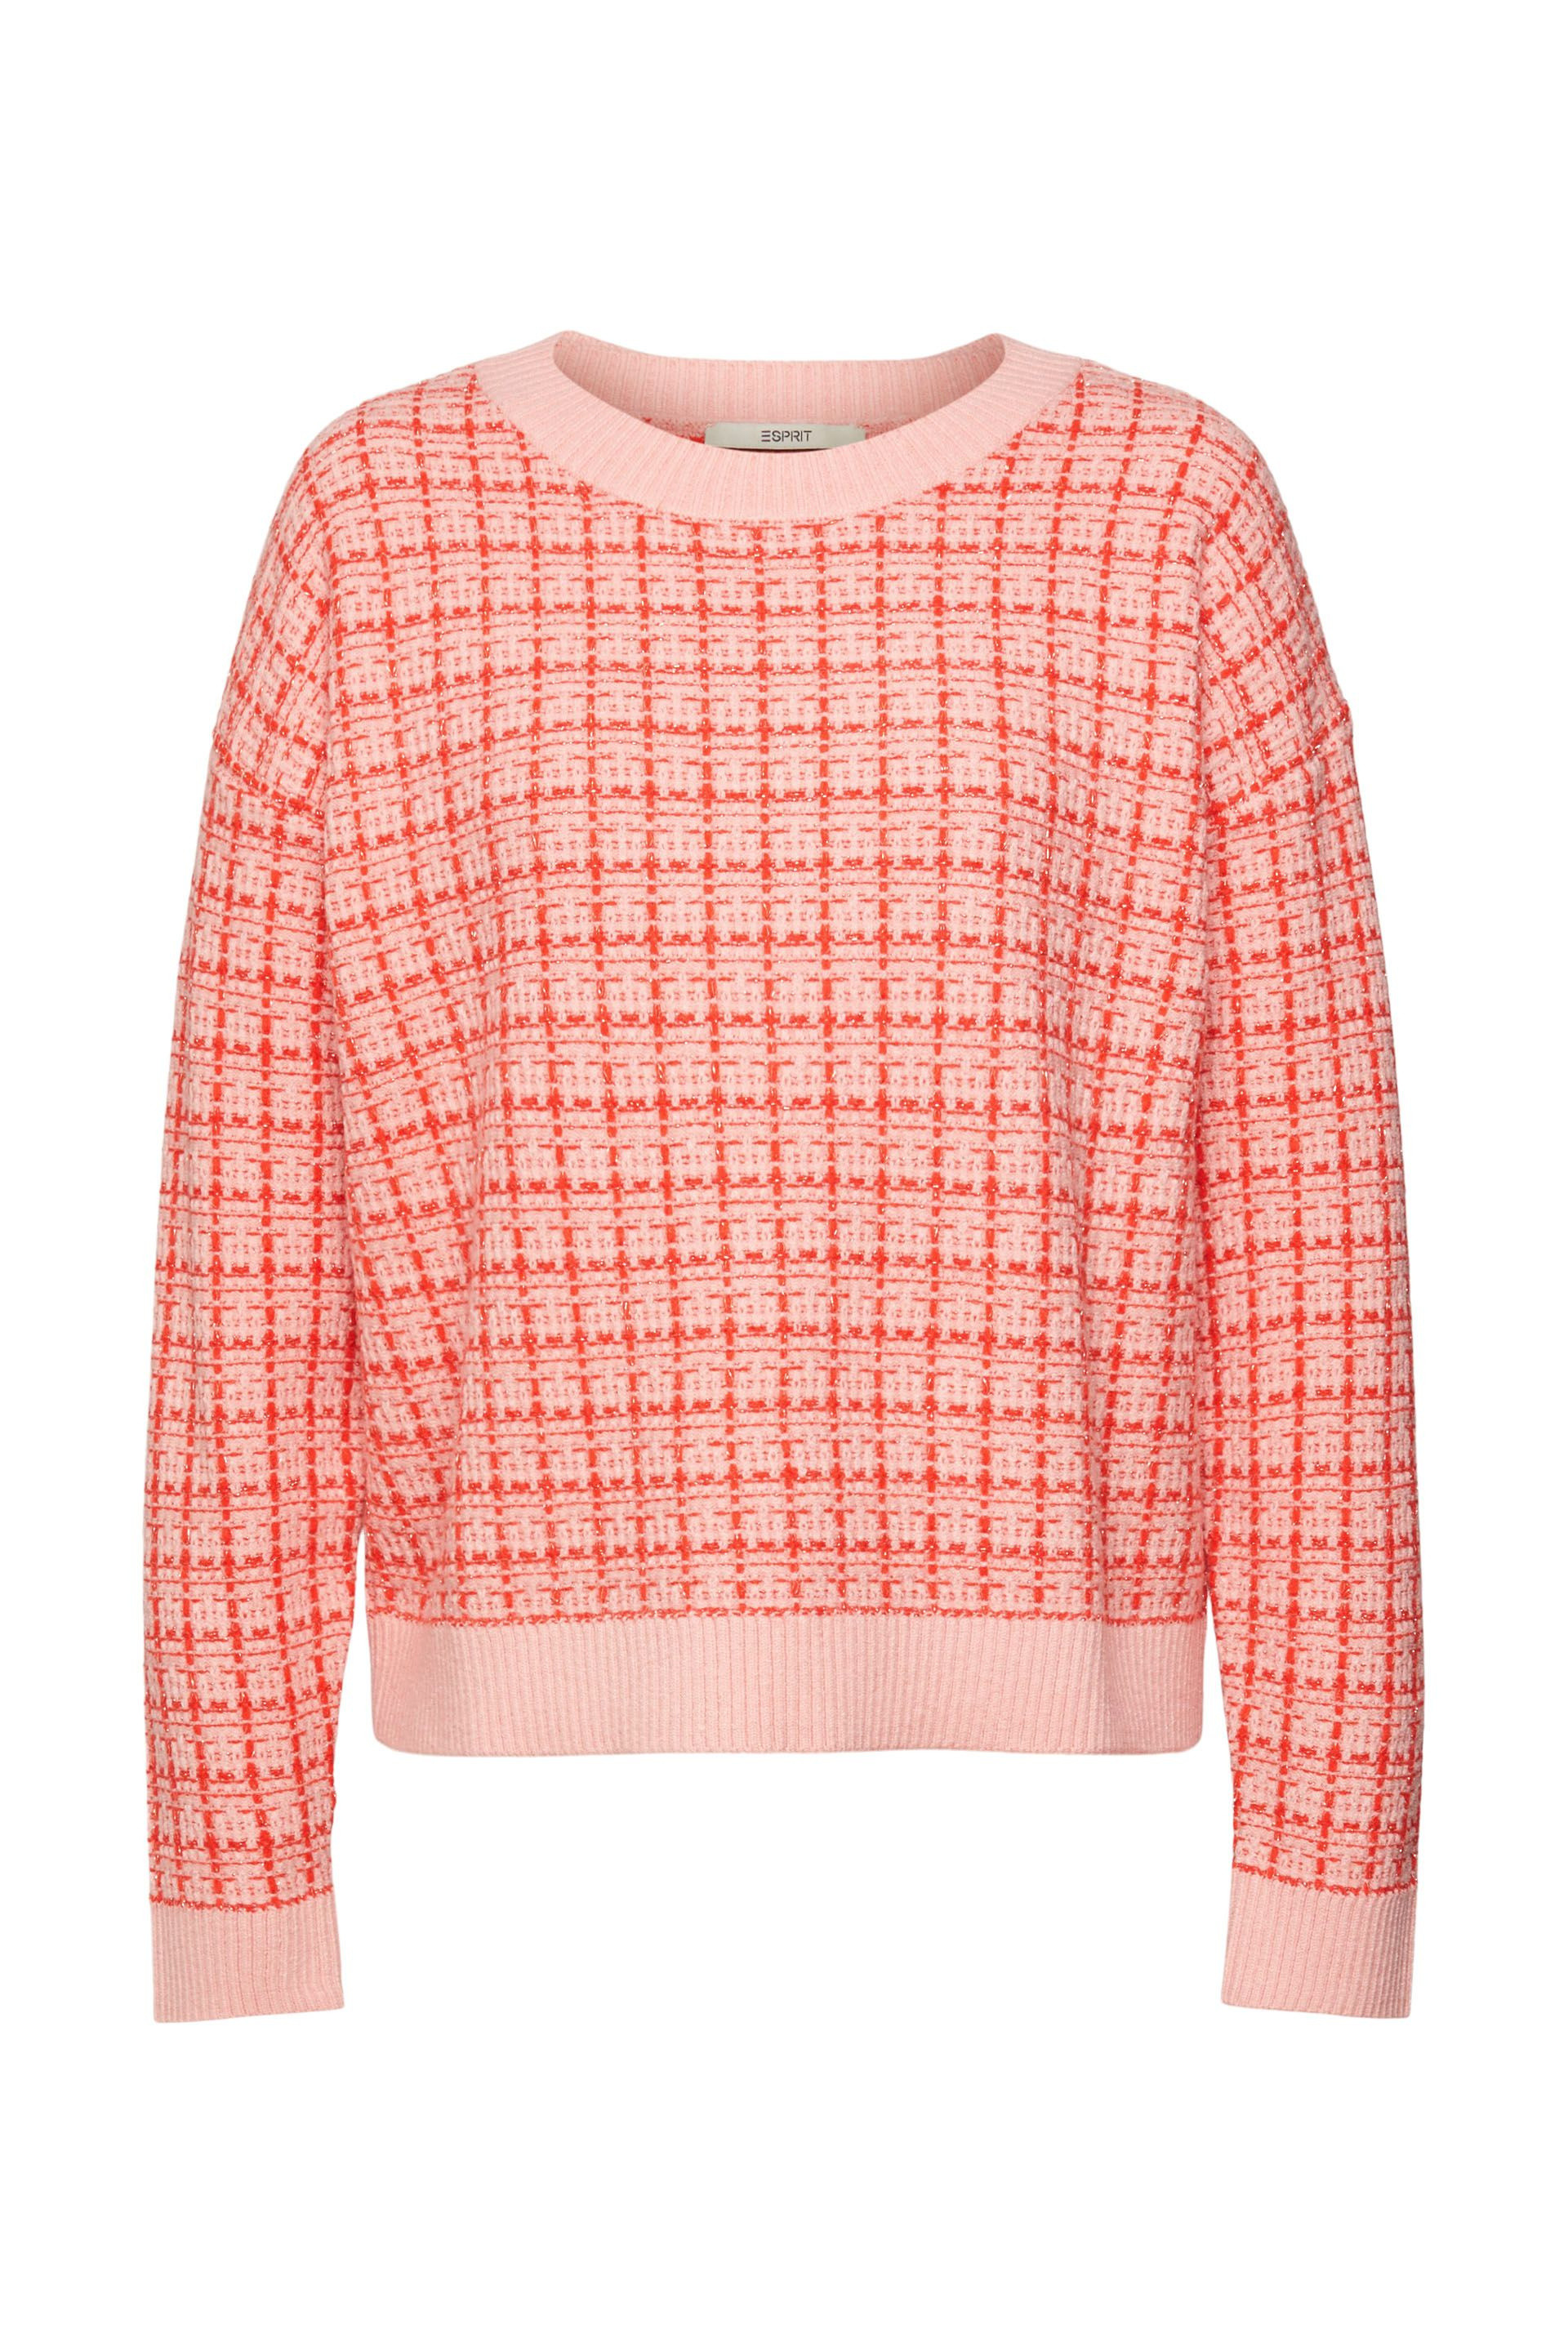 Esprit - Checked pullover, Pink, large image number 0